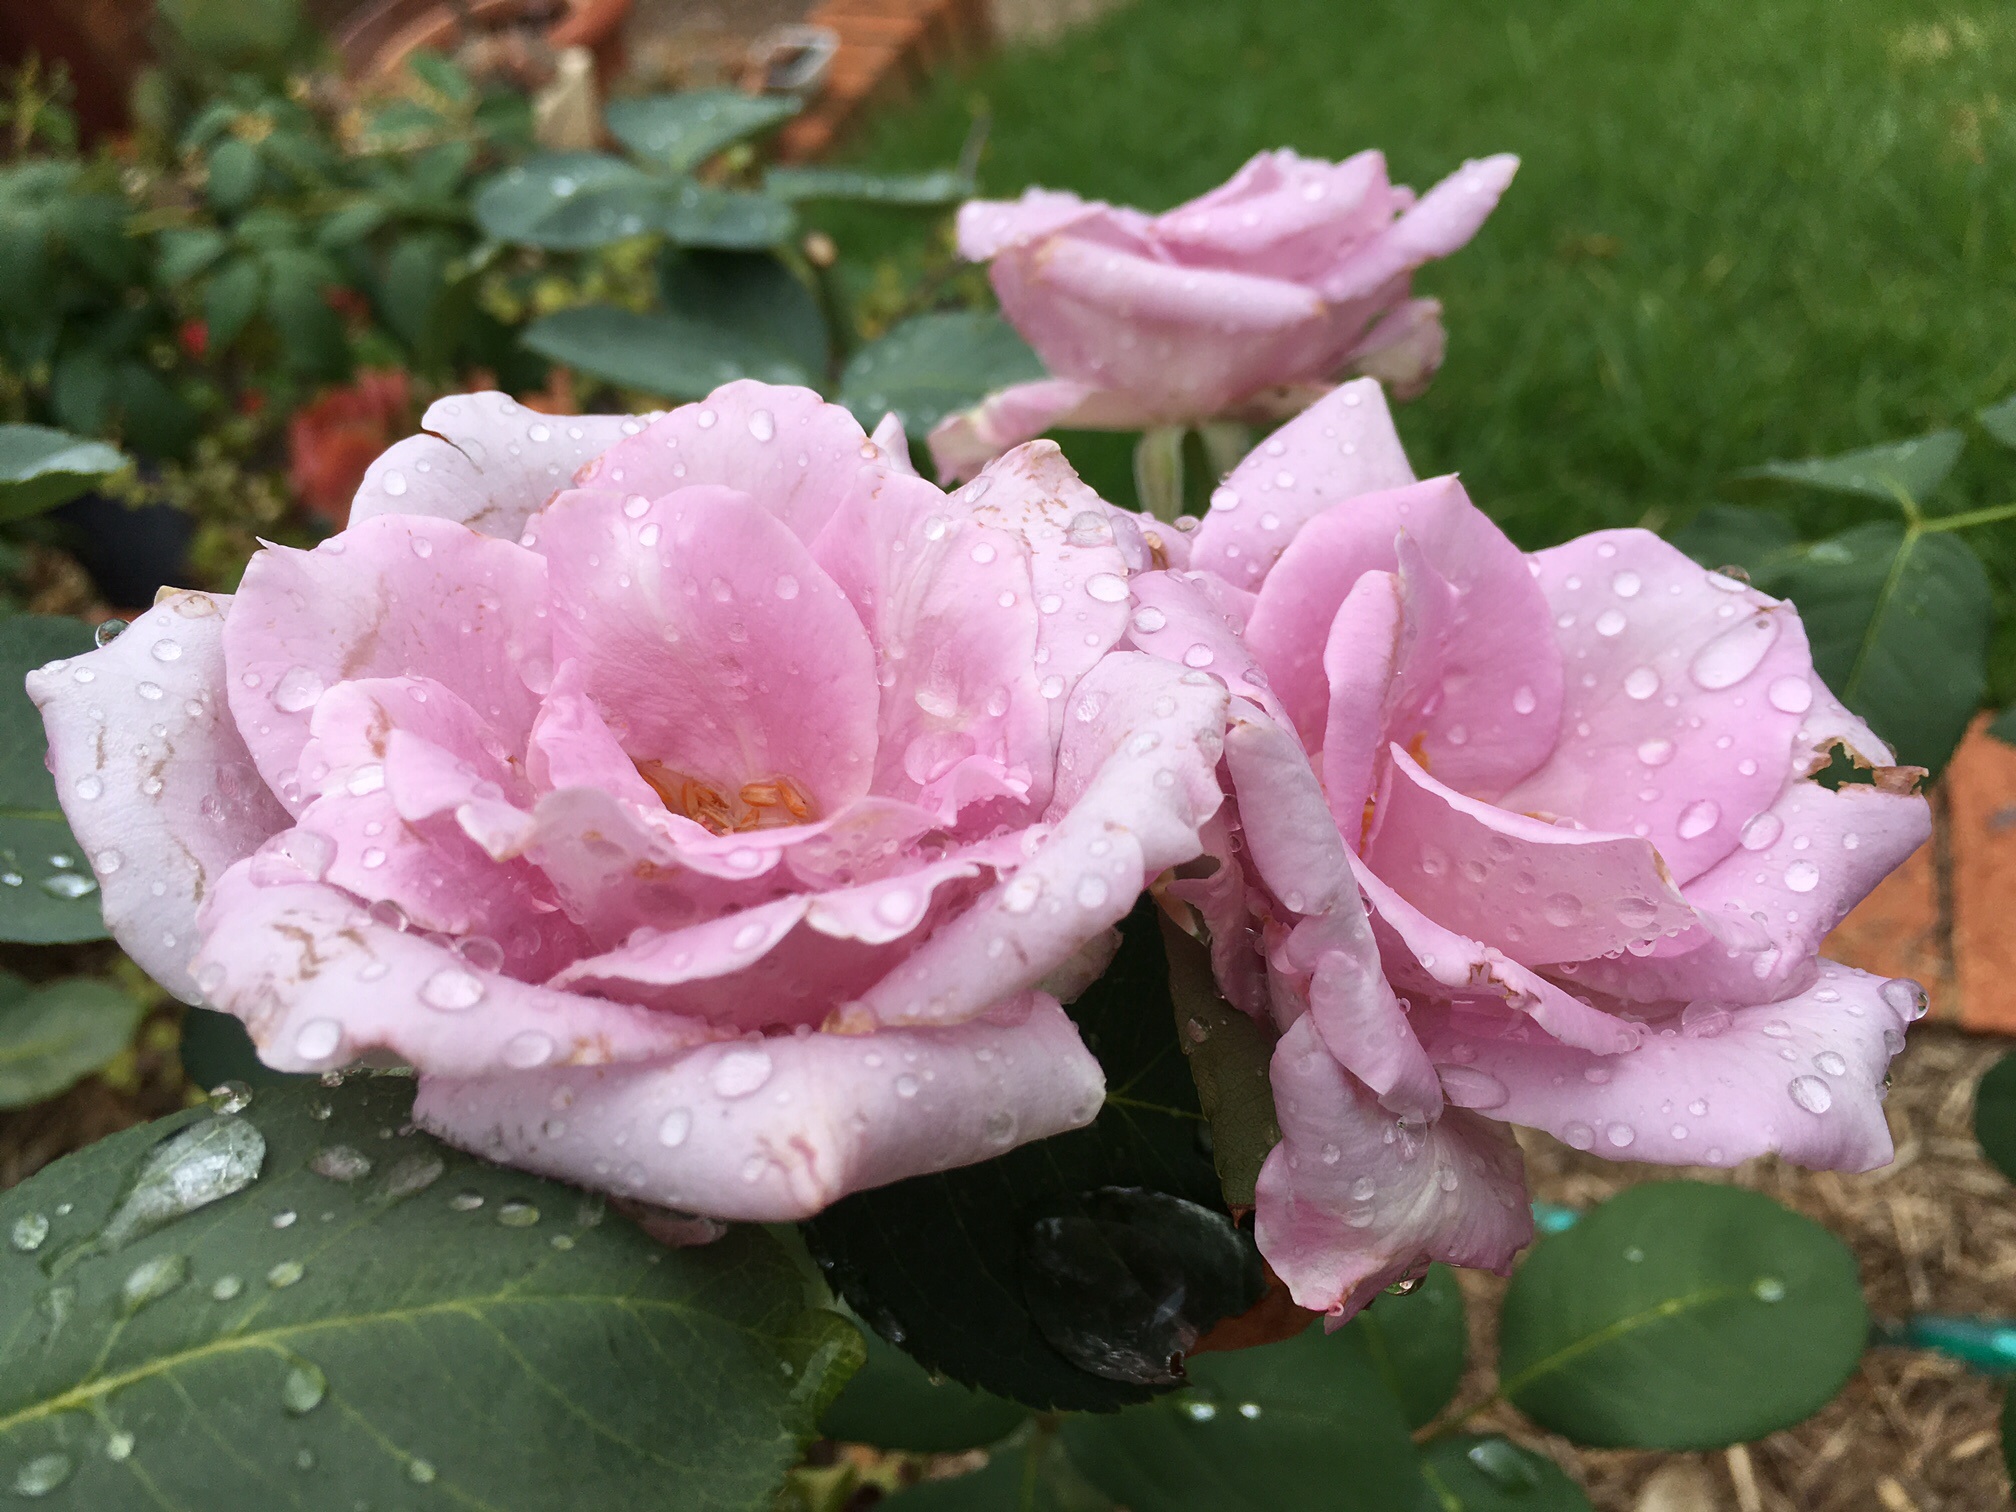 charged, refreshing rain, walking in the rain, stop and look at the rain, #itsraining, #coolchange, watering lawns, care for lawns, soaker hose for deep watering, golden rain tree, roses